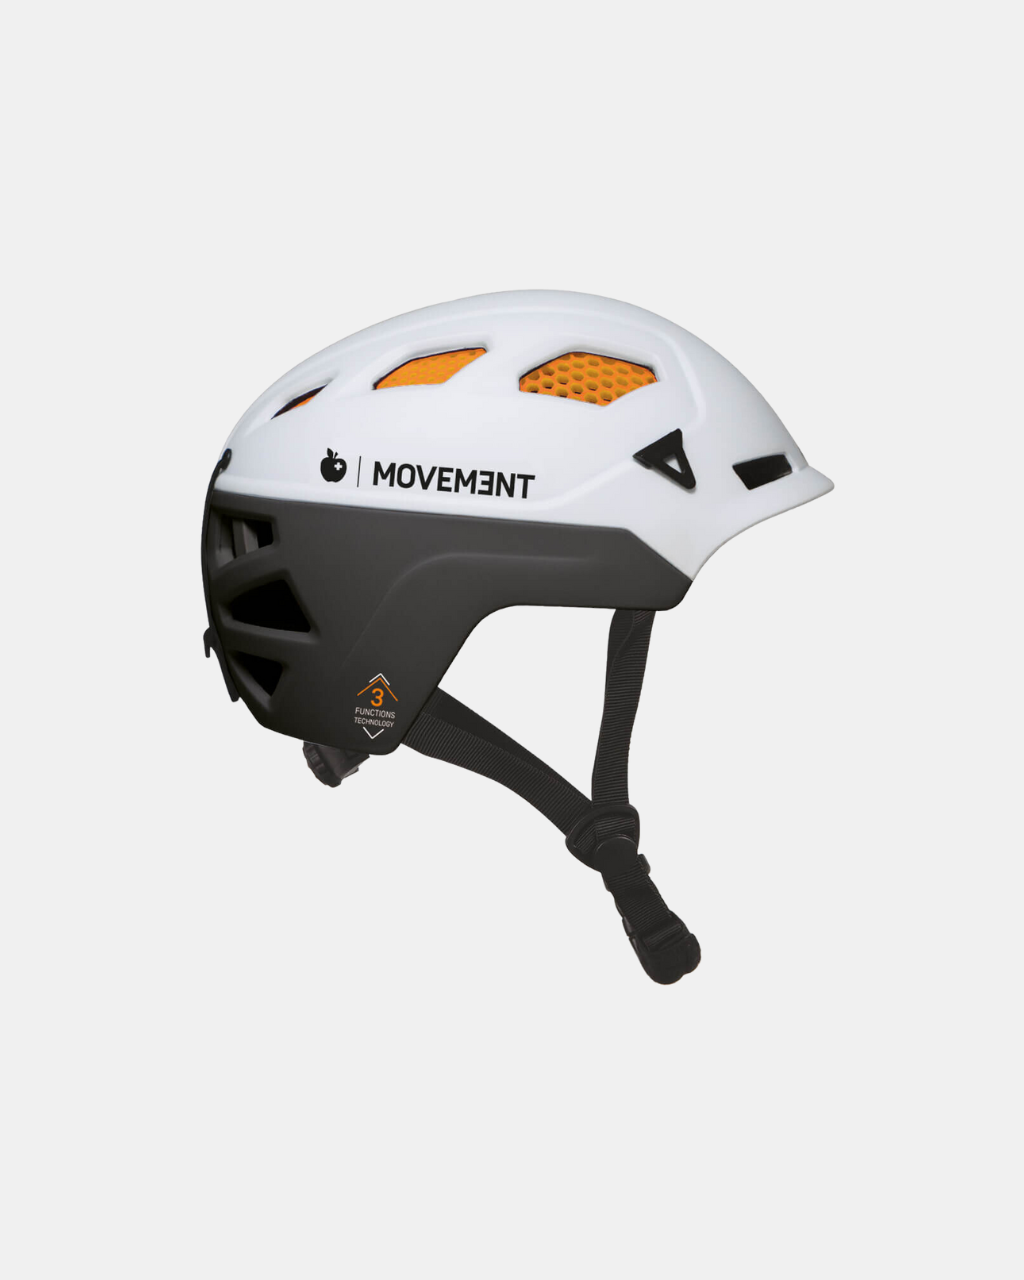 Experience comfort and security with the Movement 3Tech Alpi orange helmet for your mountain pursuits.